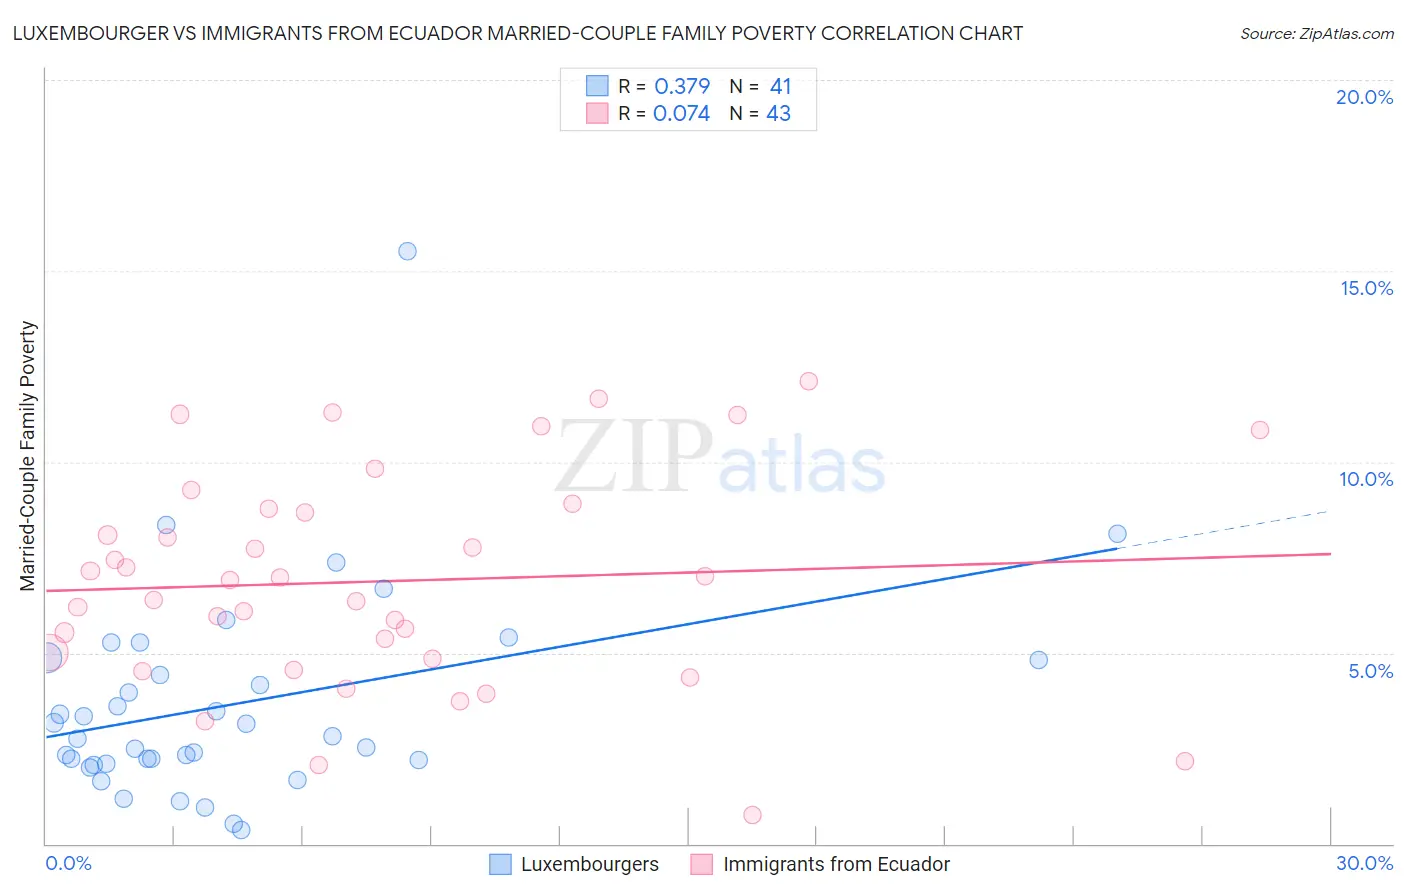 Luxembourger vs Immigrants from Ecuador Married-Couple Family Poverty